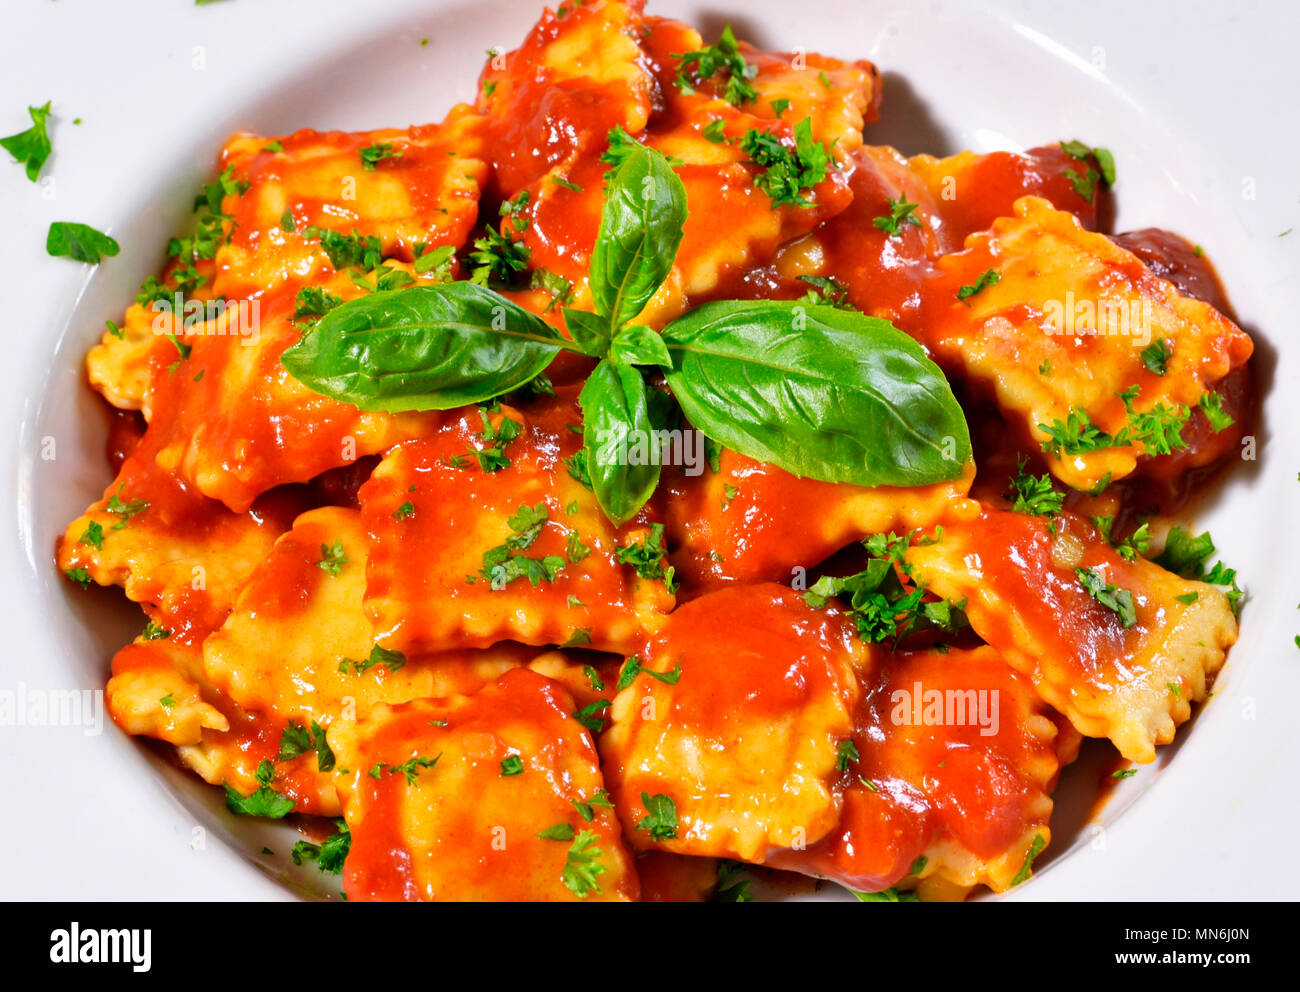 Fresh ravioli pasta with parsley and basil leaf, italian cuisine. White plate and wooden table, pasta dish. Stock Photo